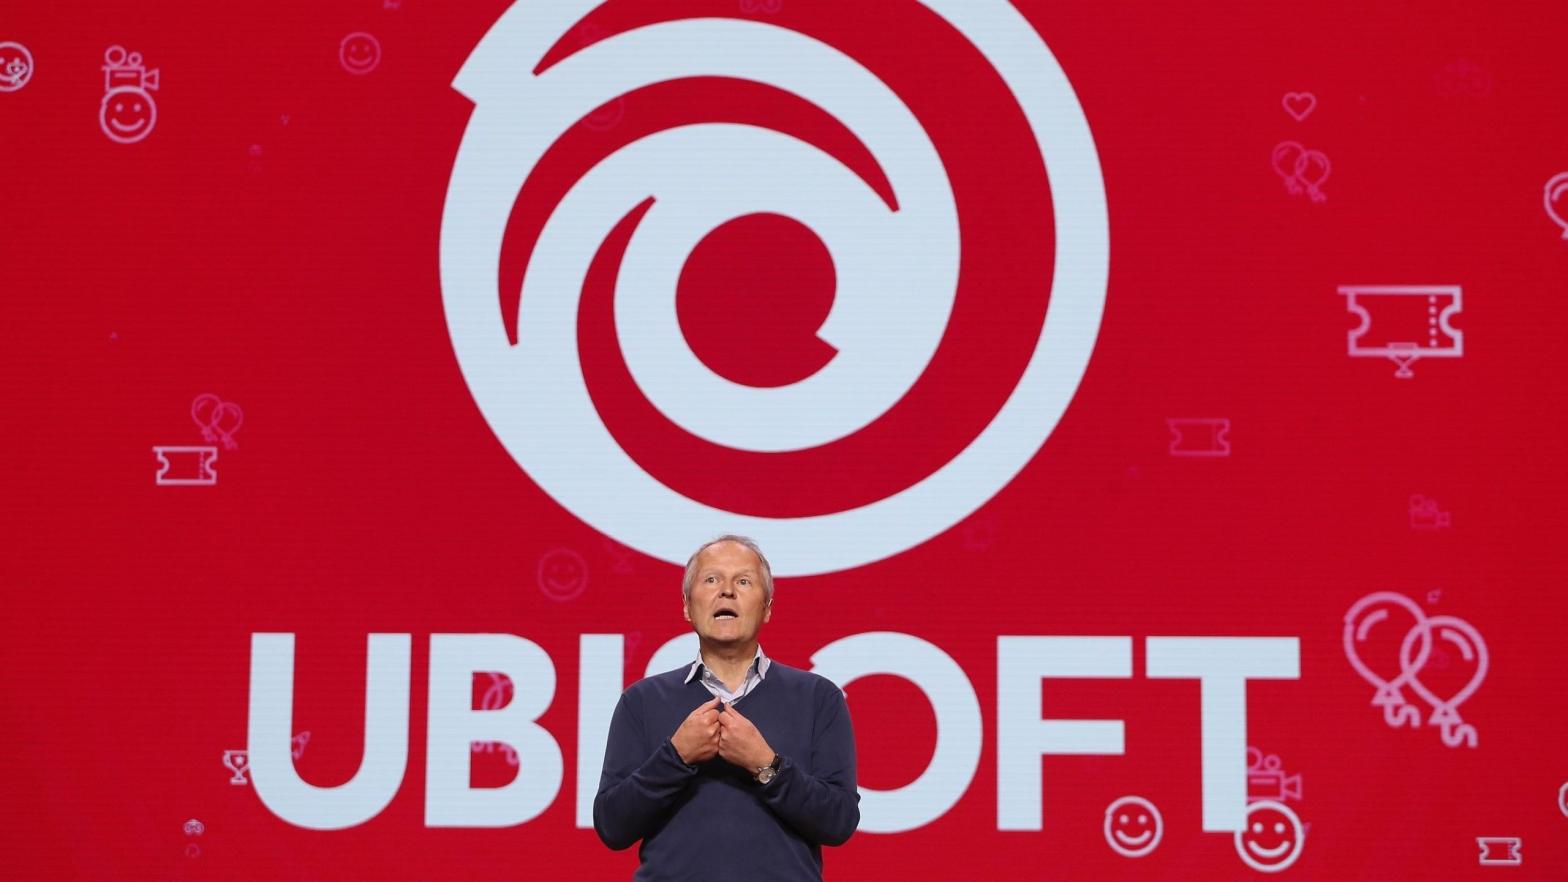 CEO and co-founder Yves Guillemot stands on stage at the Ubisoft E3 2019 Conference.  (Photo: Christian Petersen, Getty Images)